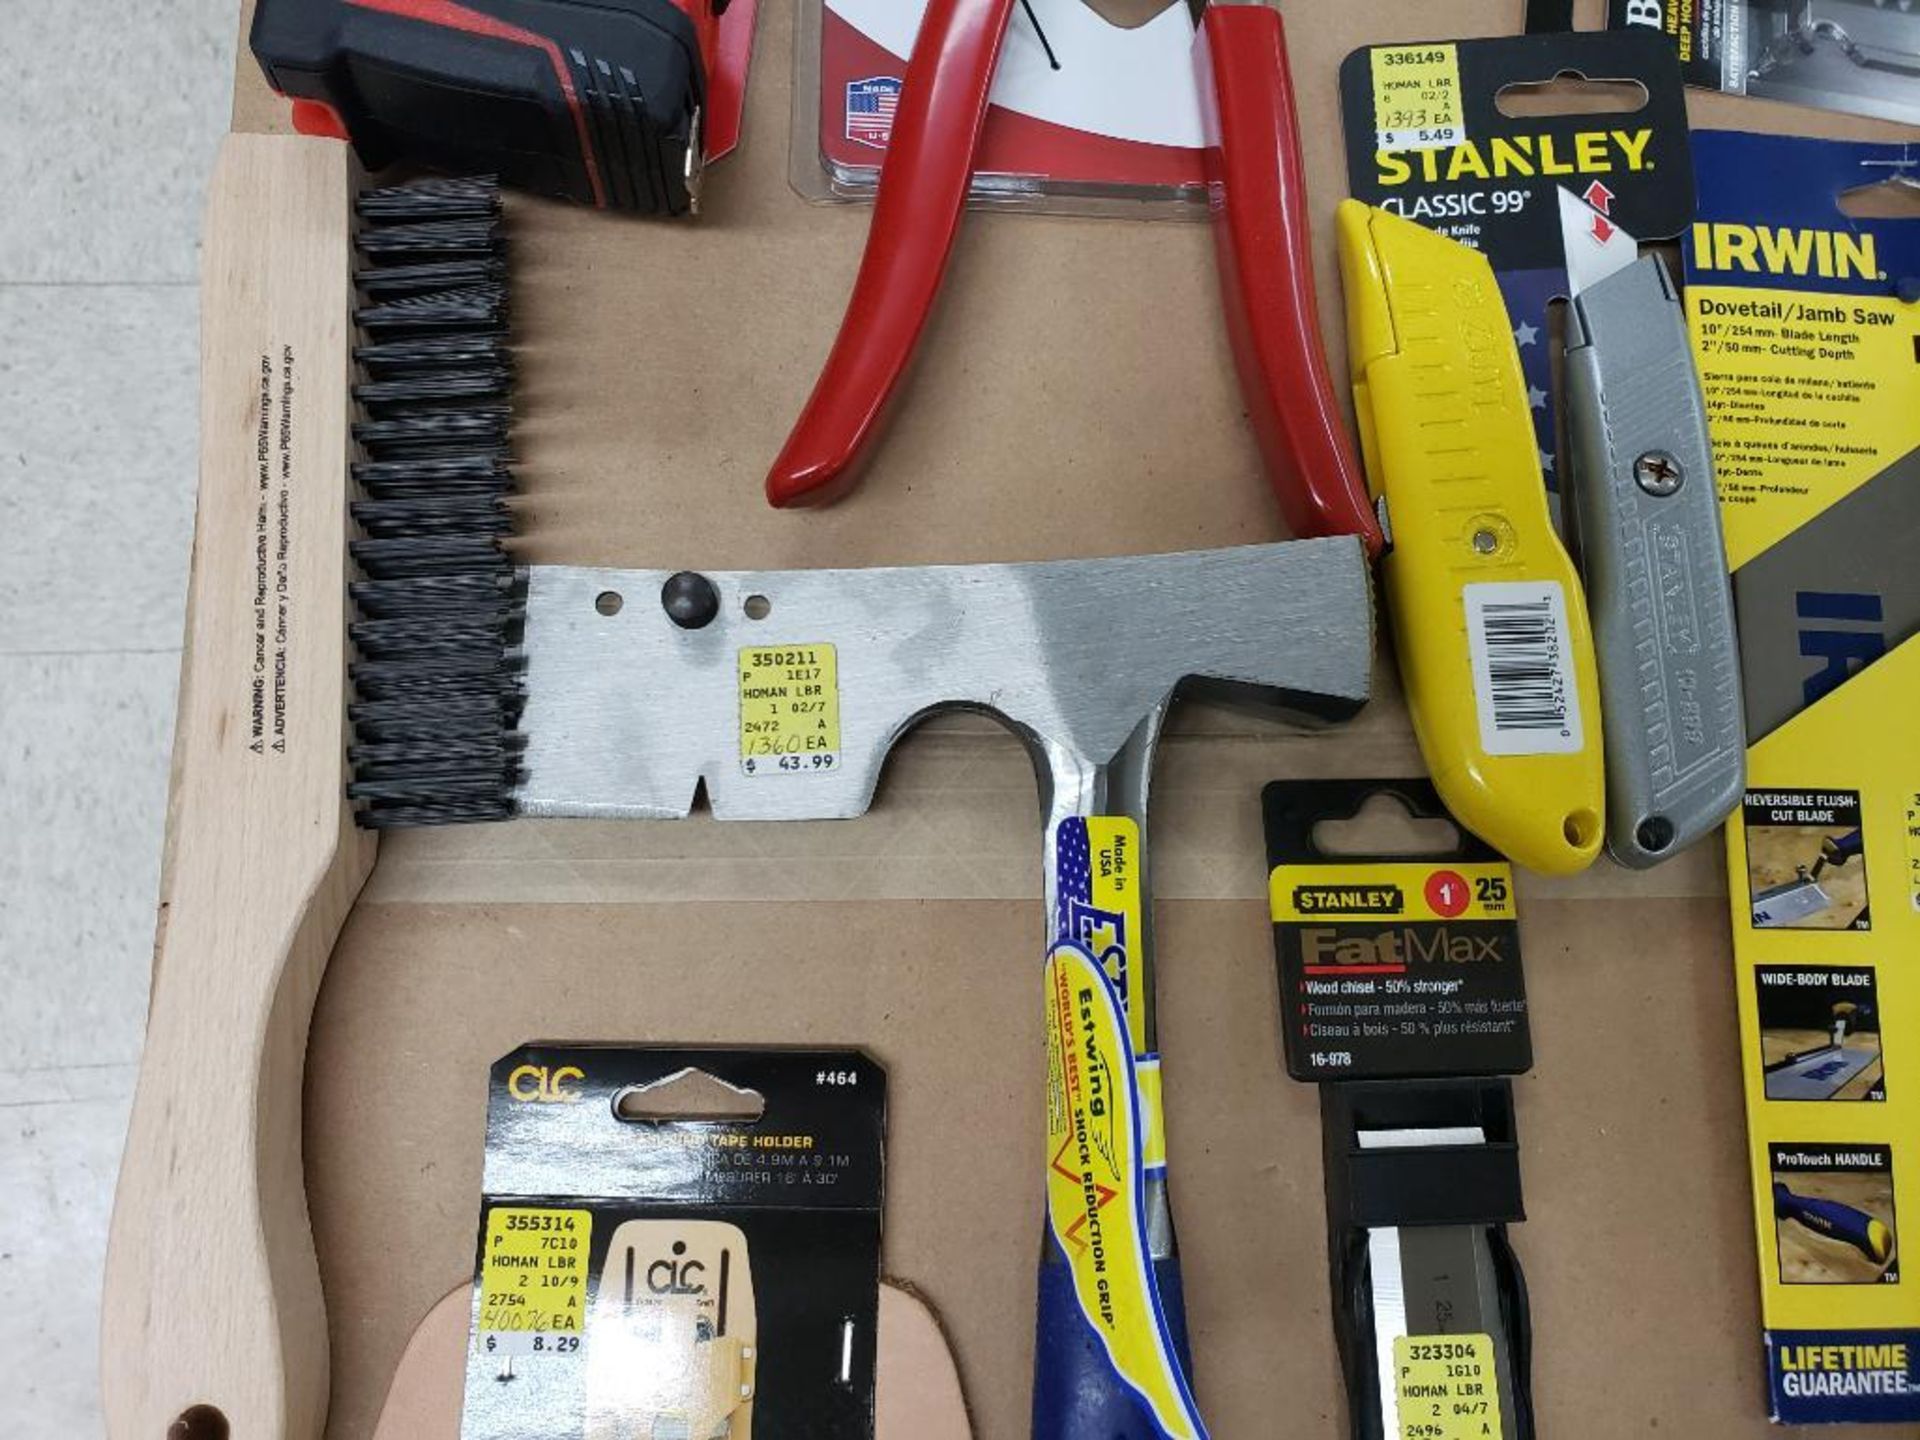 Large assortment of tools. New as pictured. - Image 3 of 12